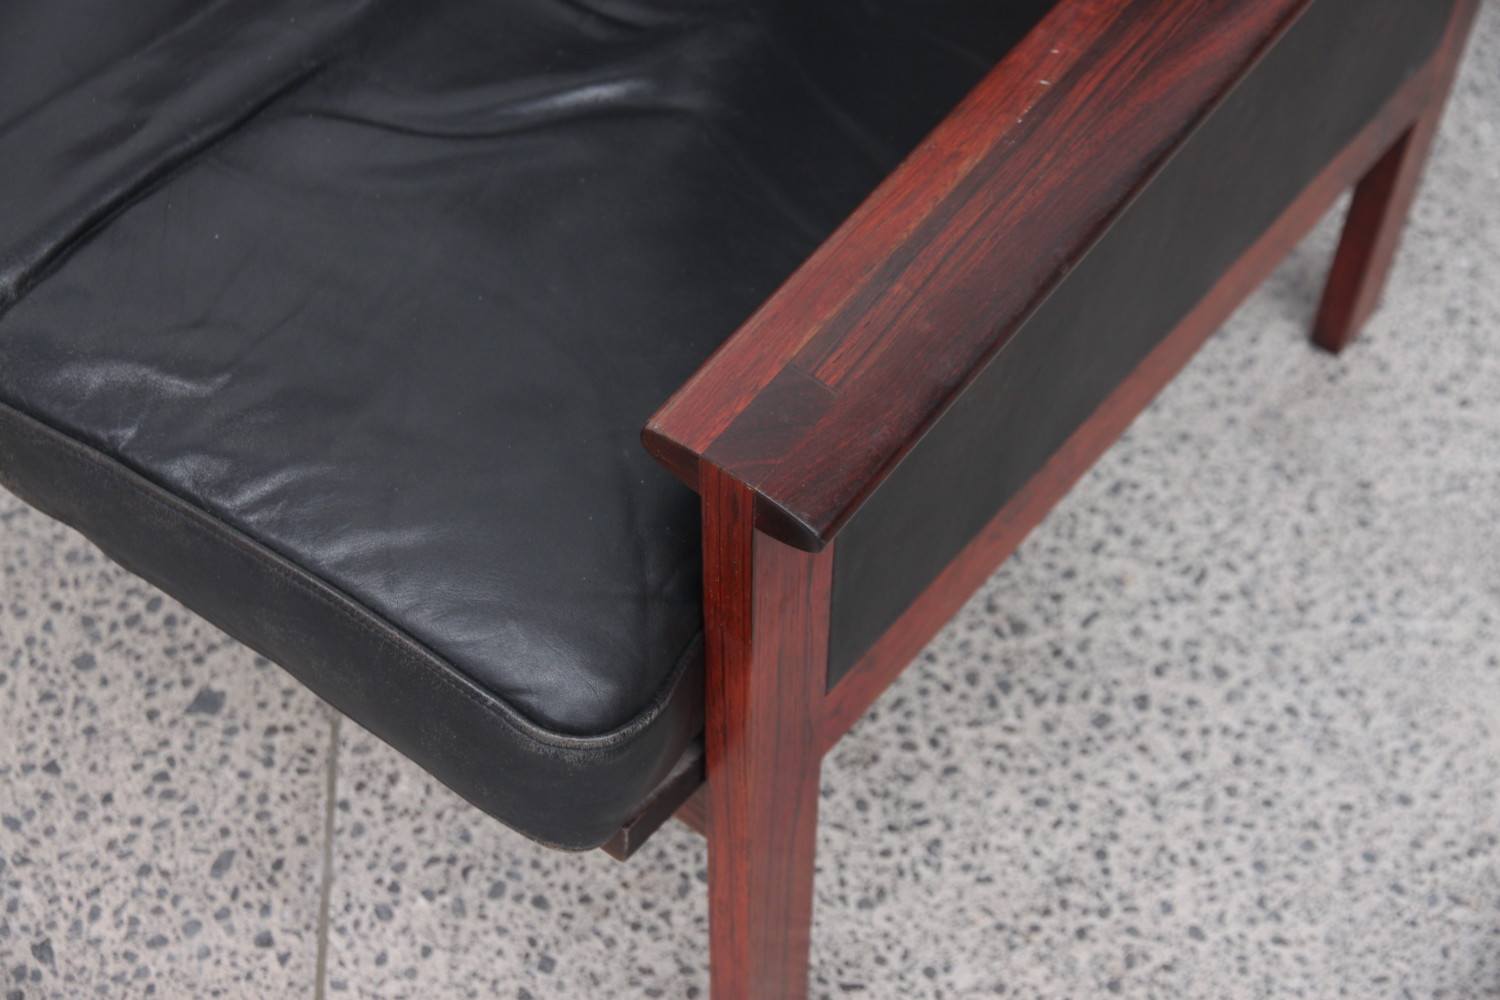 Rosewood & Leather Armchair by Illum Wikkelso